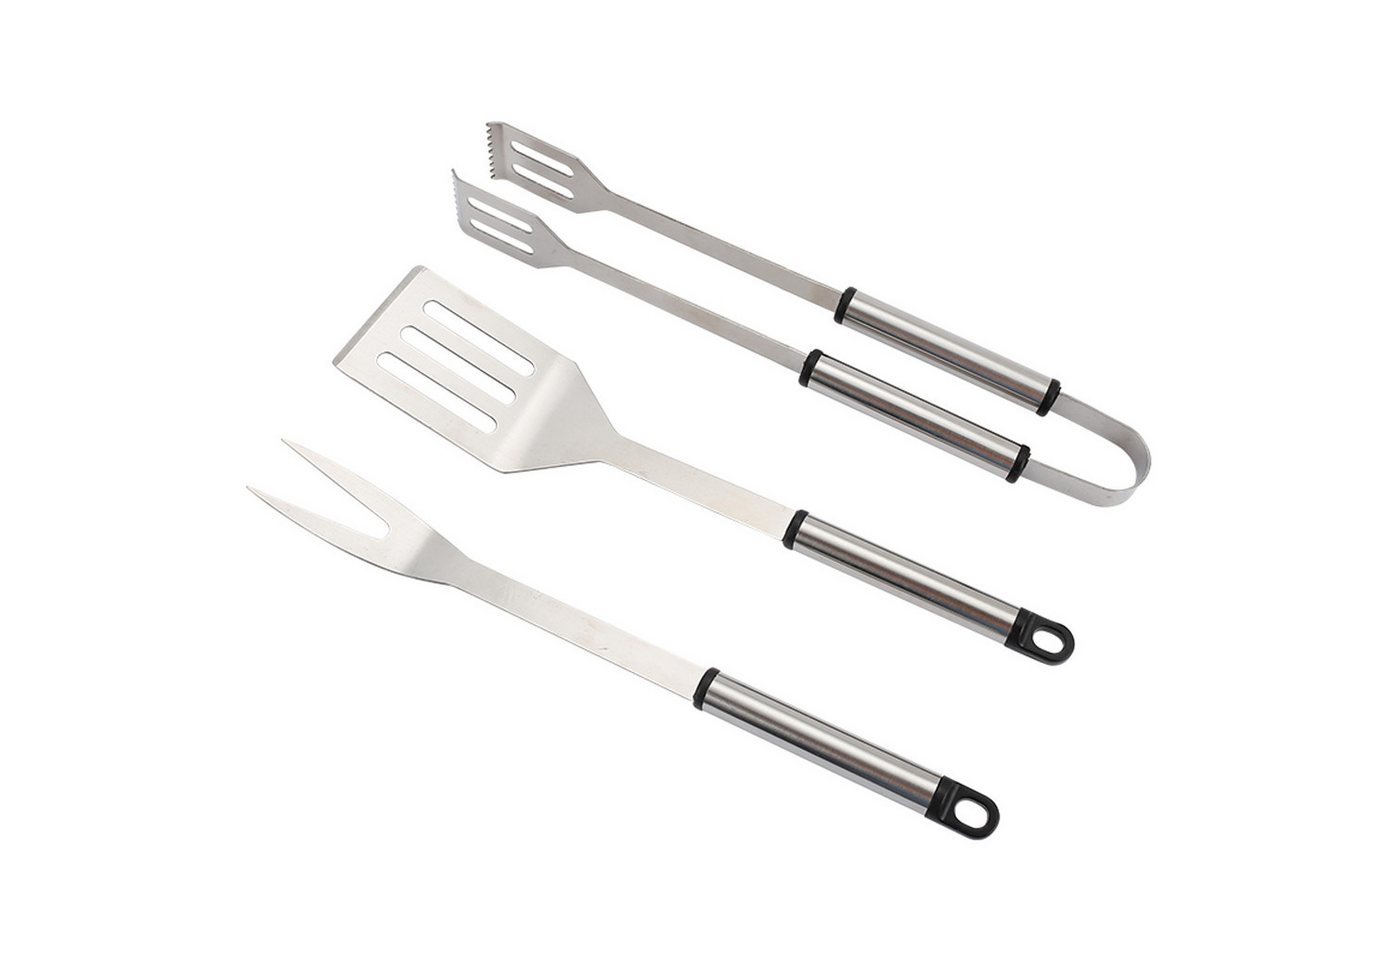 Master Grill & Party Grillbesteck-Set MG115, (3 tlg), Master Grillbesteck Zubehör Set von Master Grill & Party